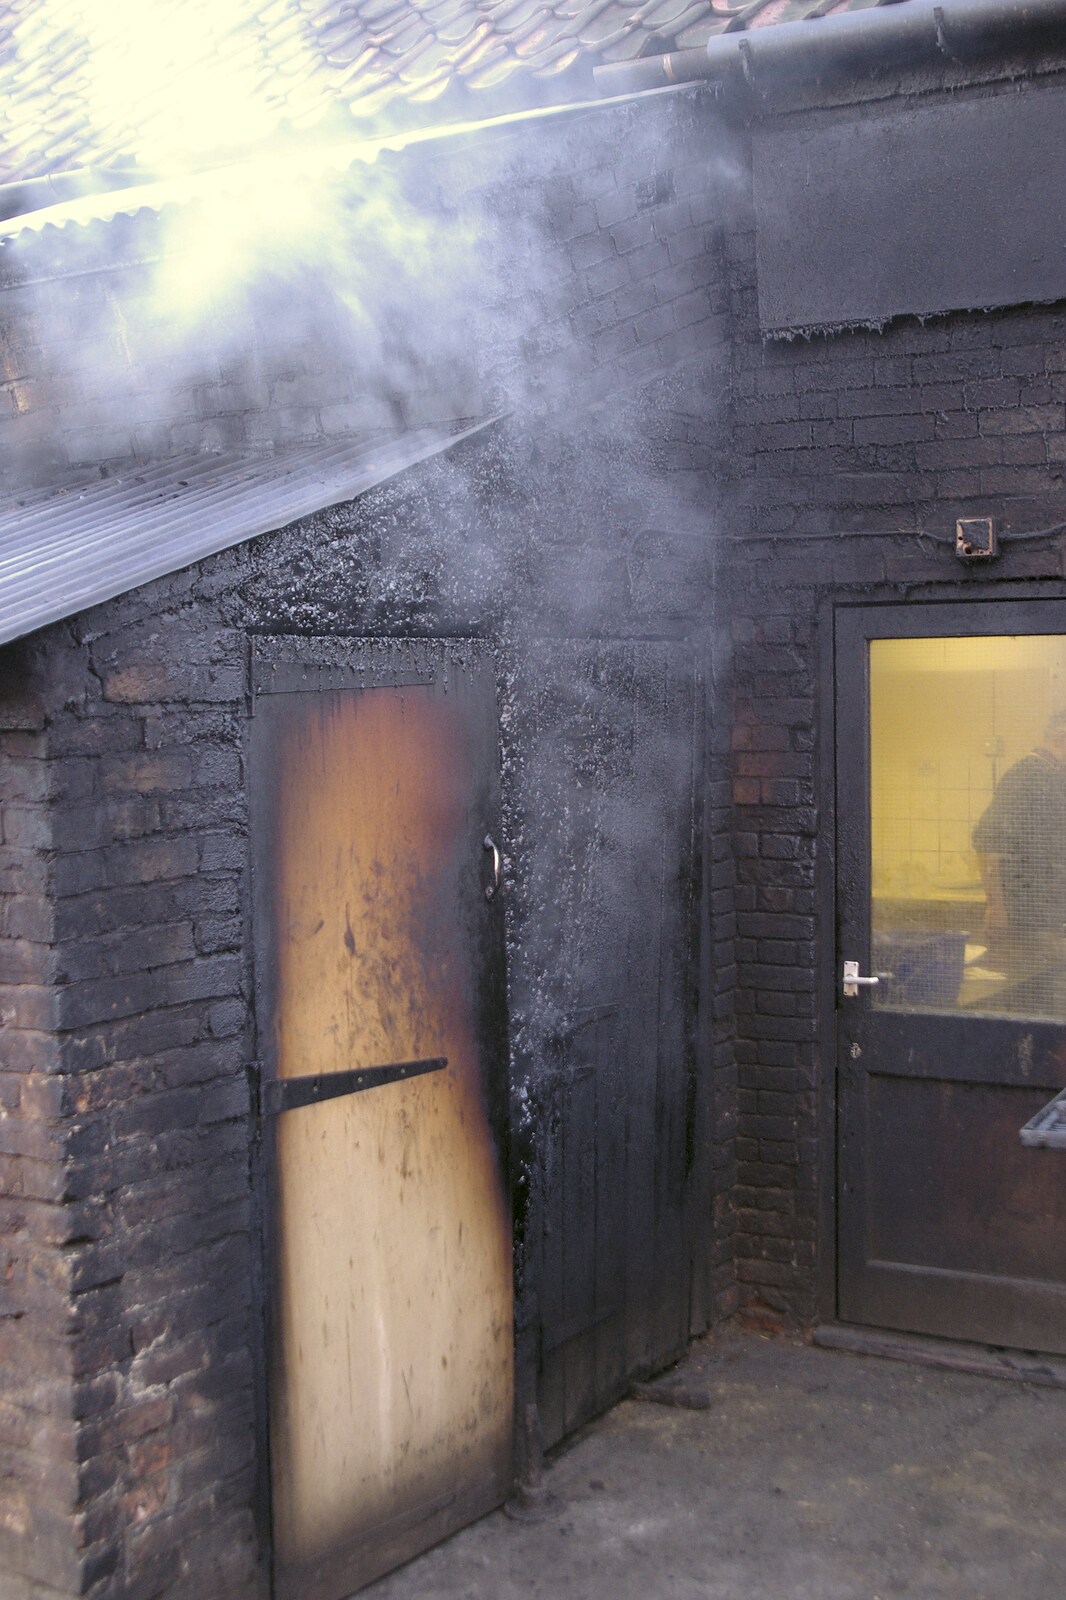 The smokehouse is, er, smoking from A Post-Christmas Trip to Orford, Suffolk - 29th December 2007